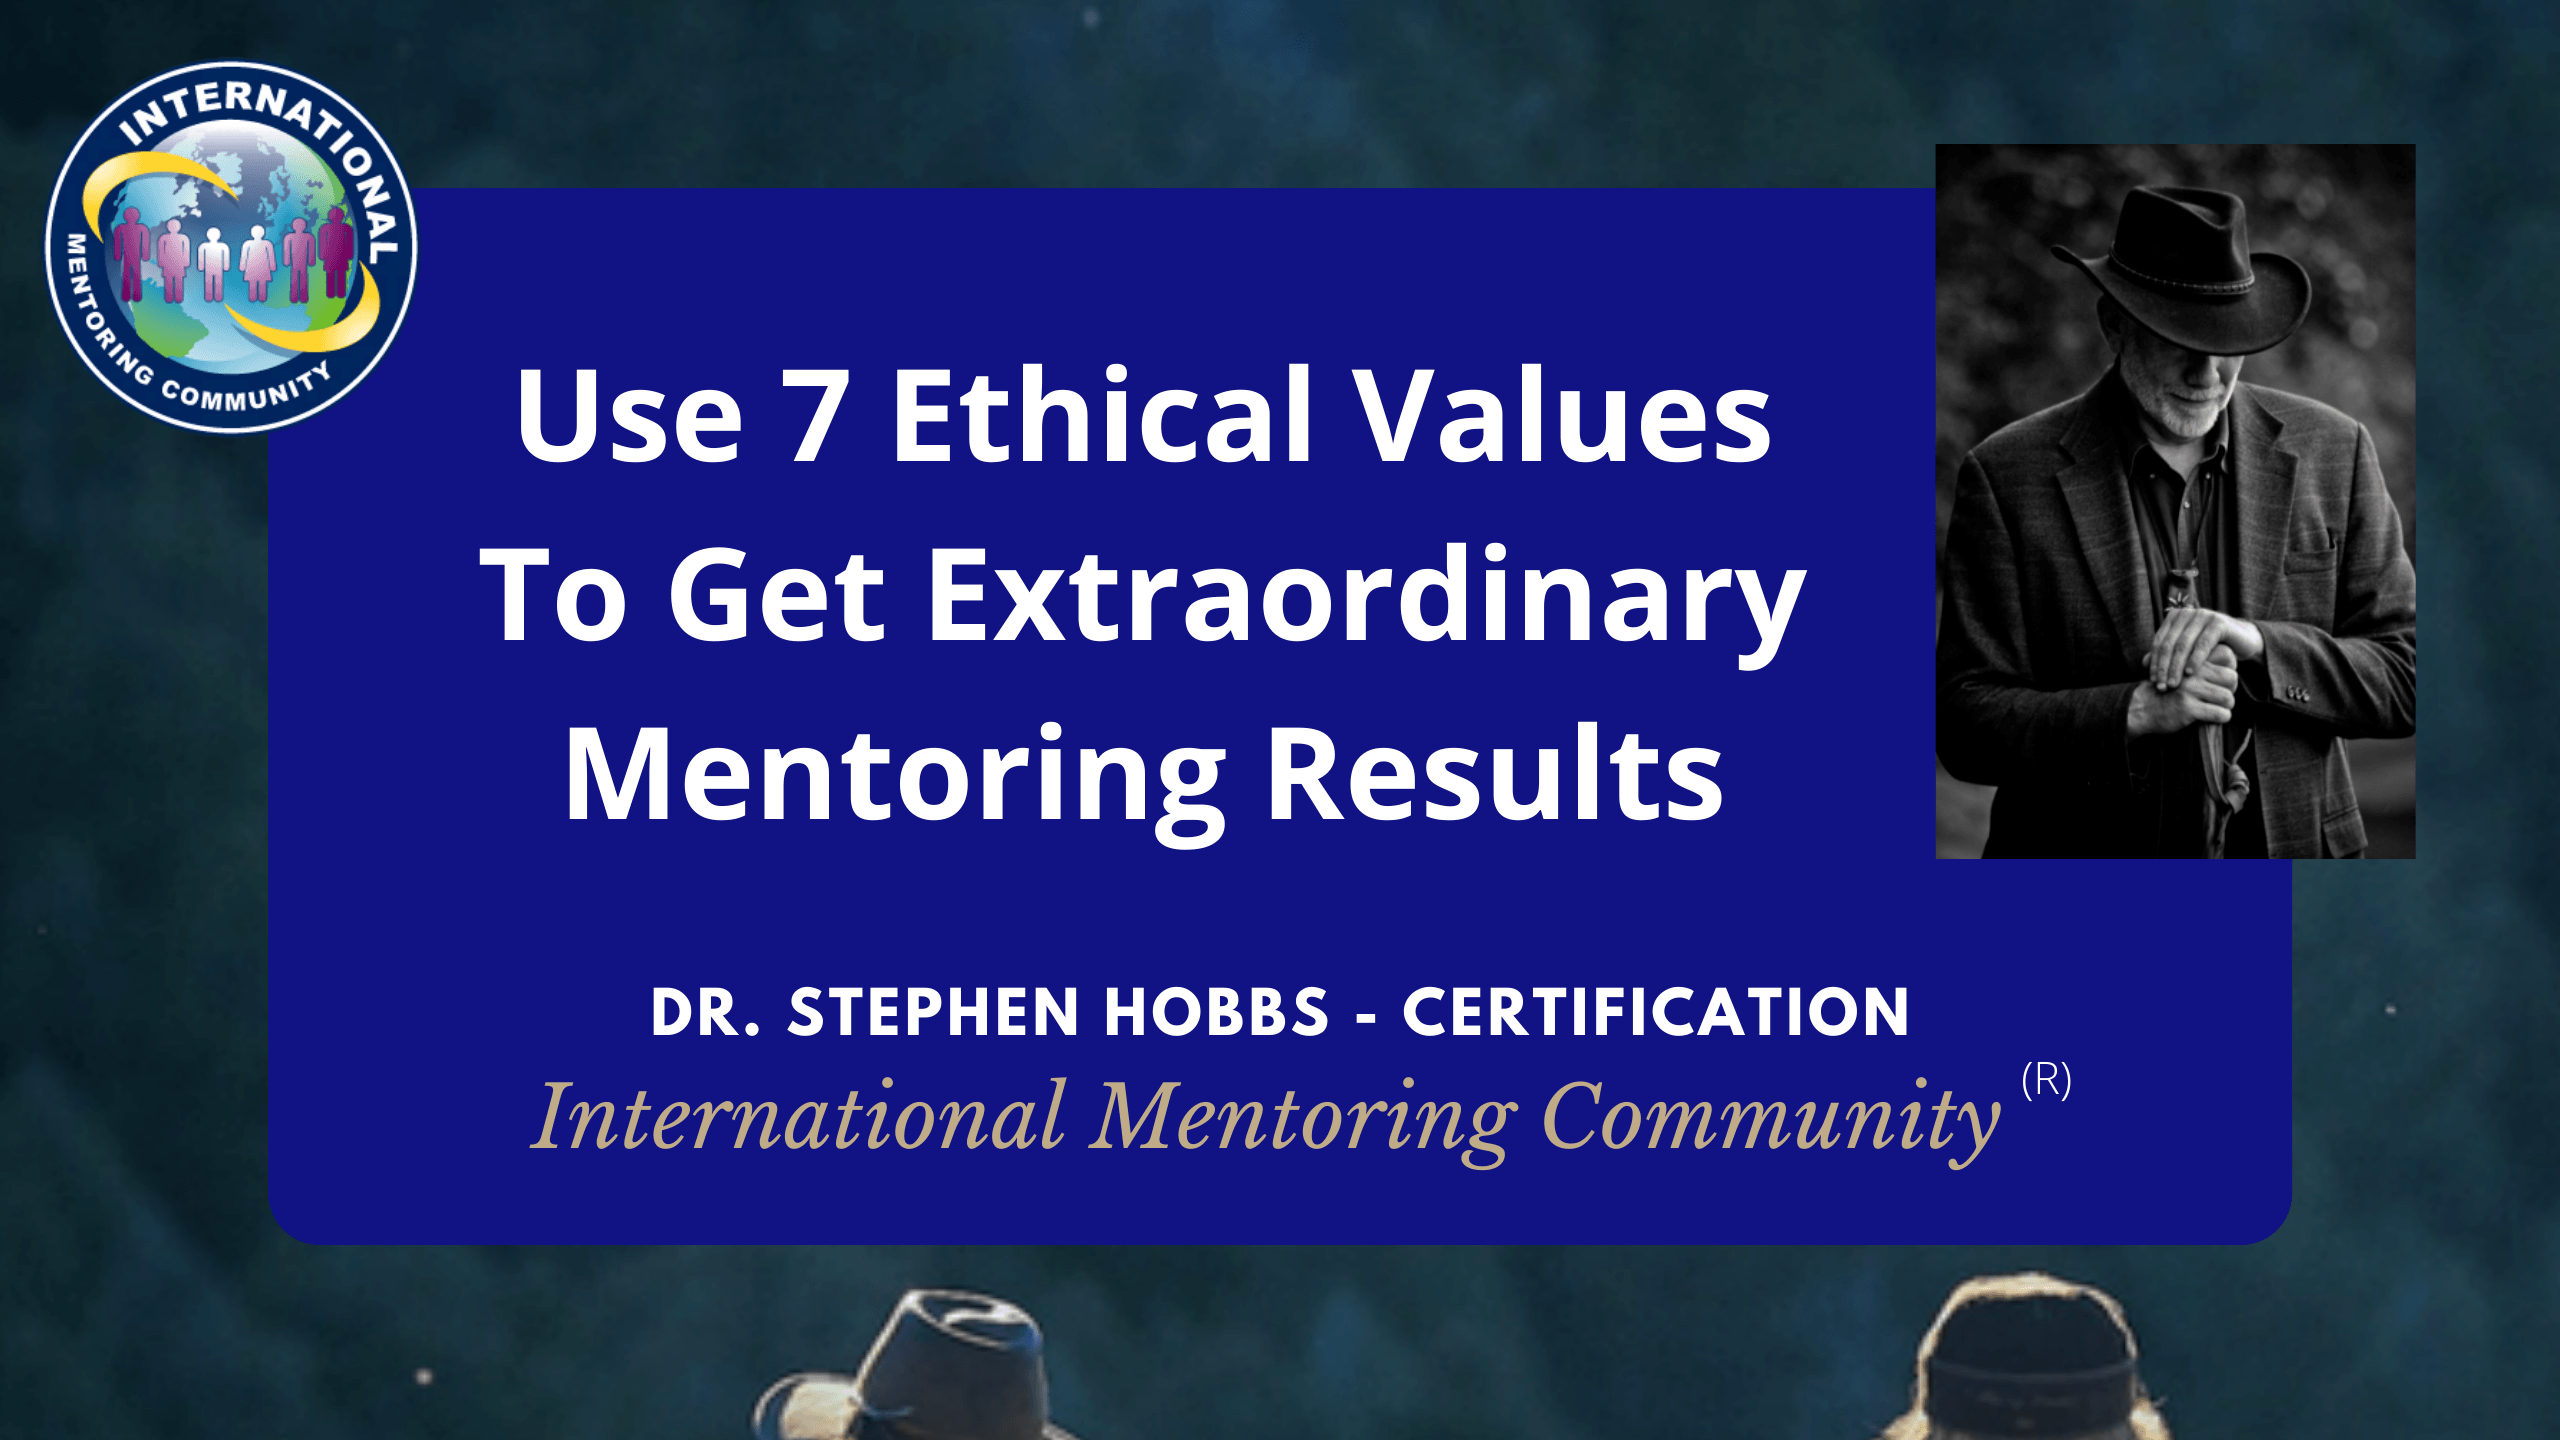 Ethical Values Mentoring Results